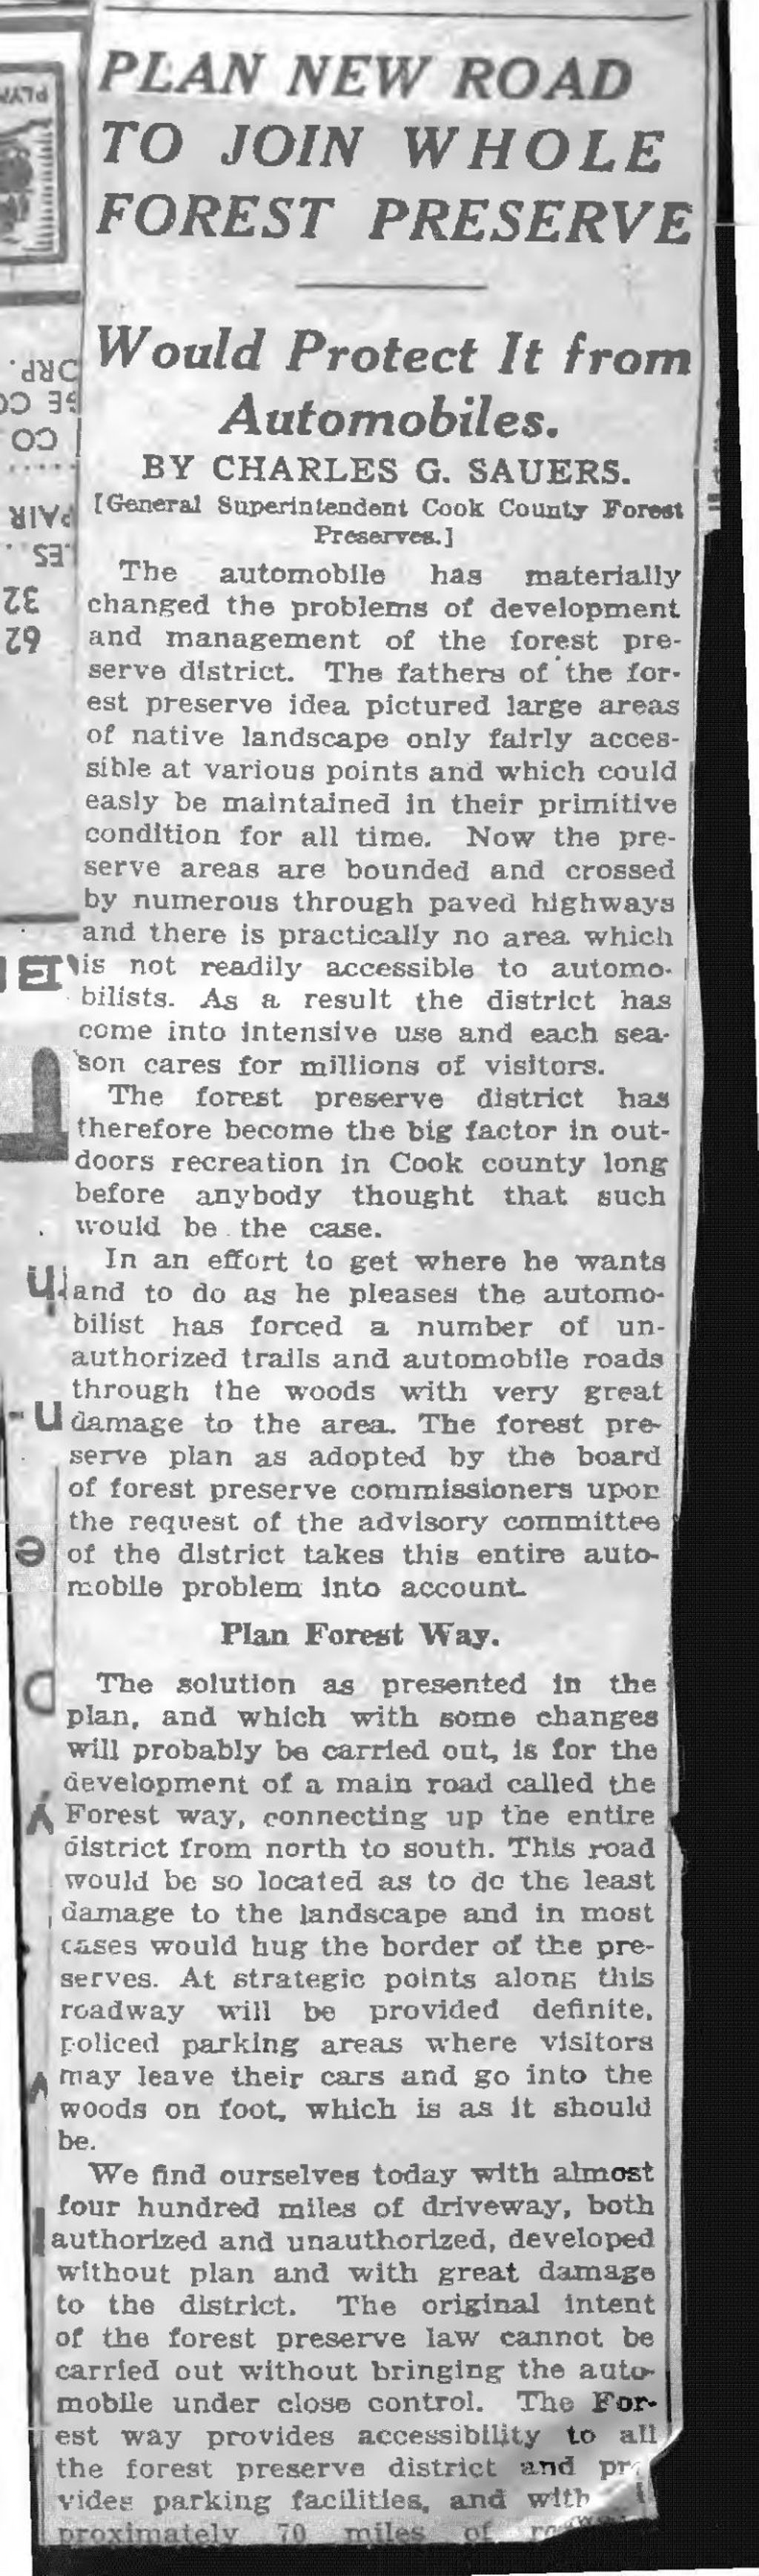 Newspaper clippings about bond issue, 1938